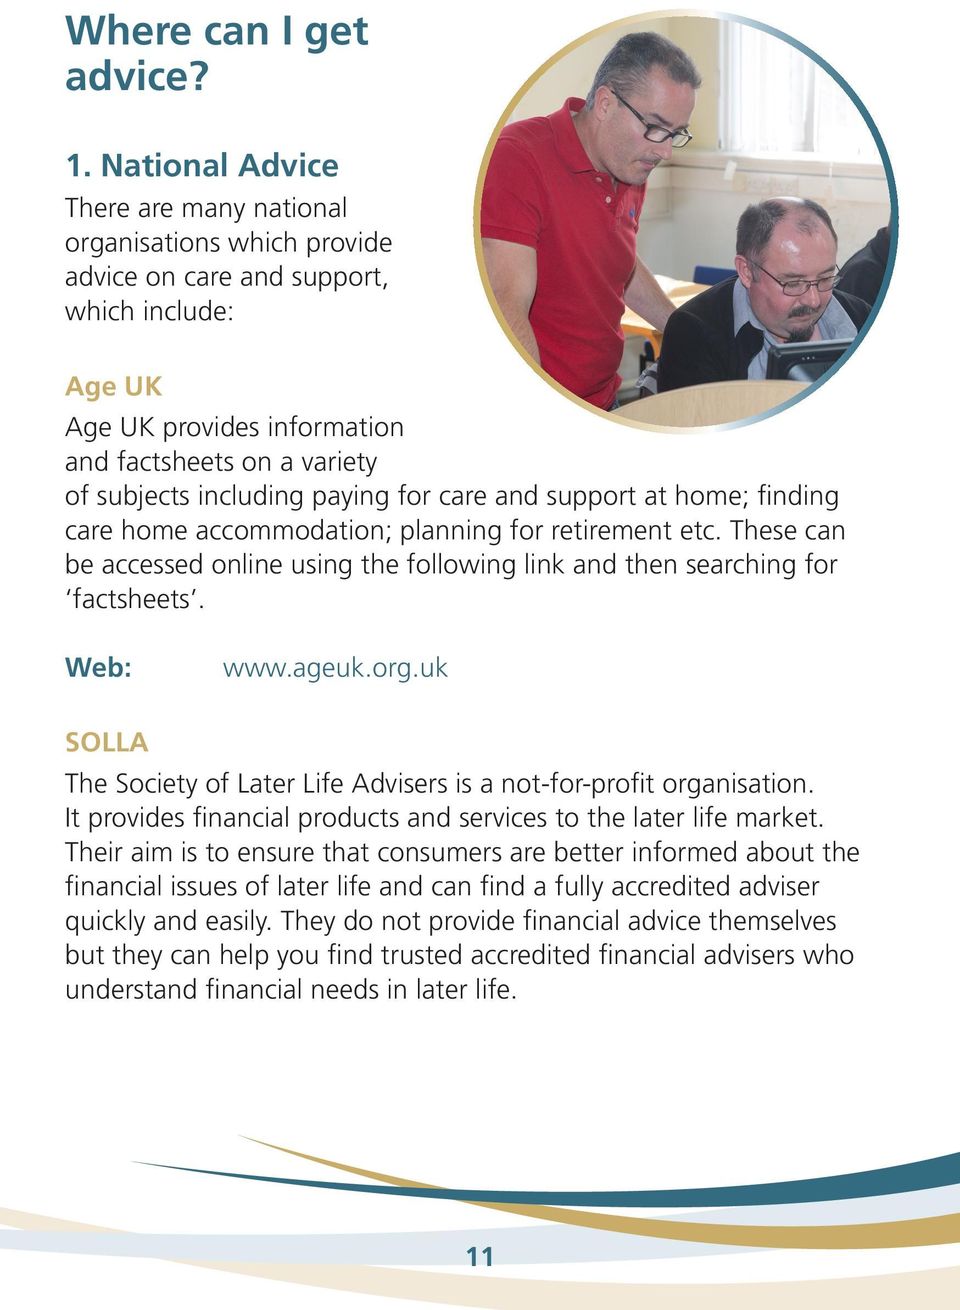 paying for care and support at home; finding care home accommodation; planning for retirement etc. These can be accessed online using the following link and then searching for factsheets. Web: www.